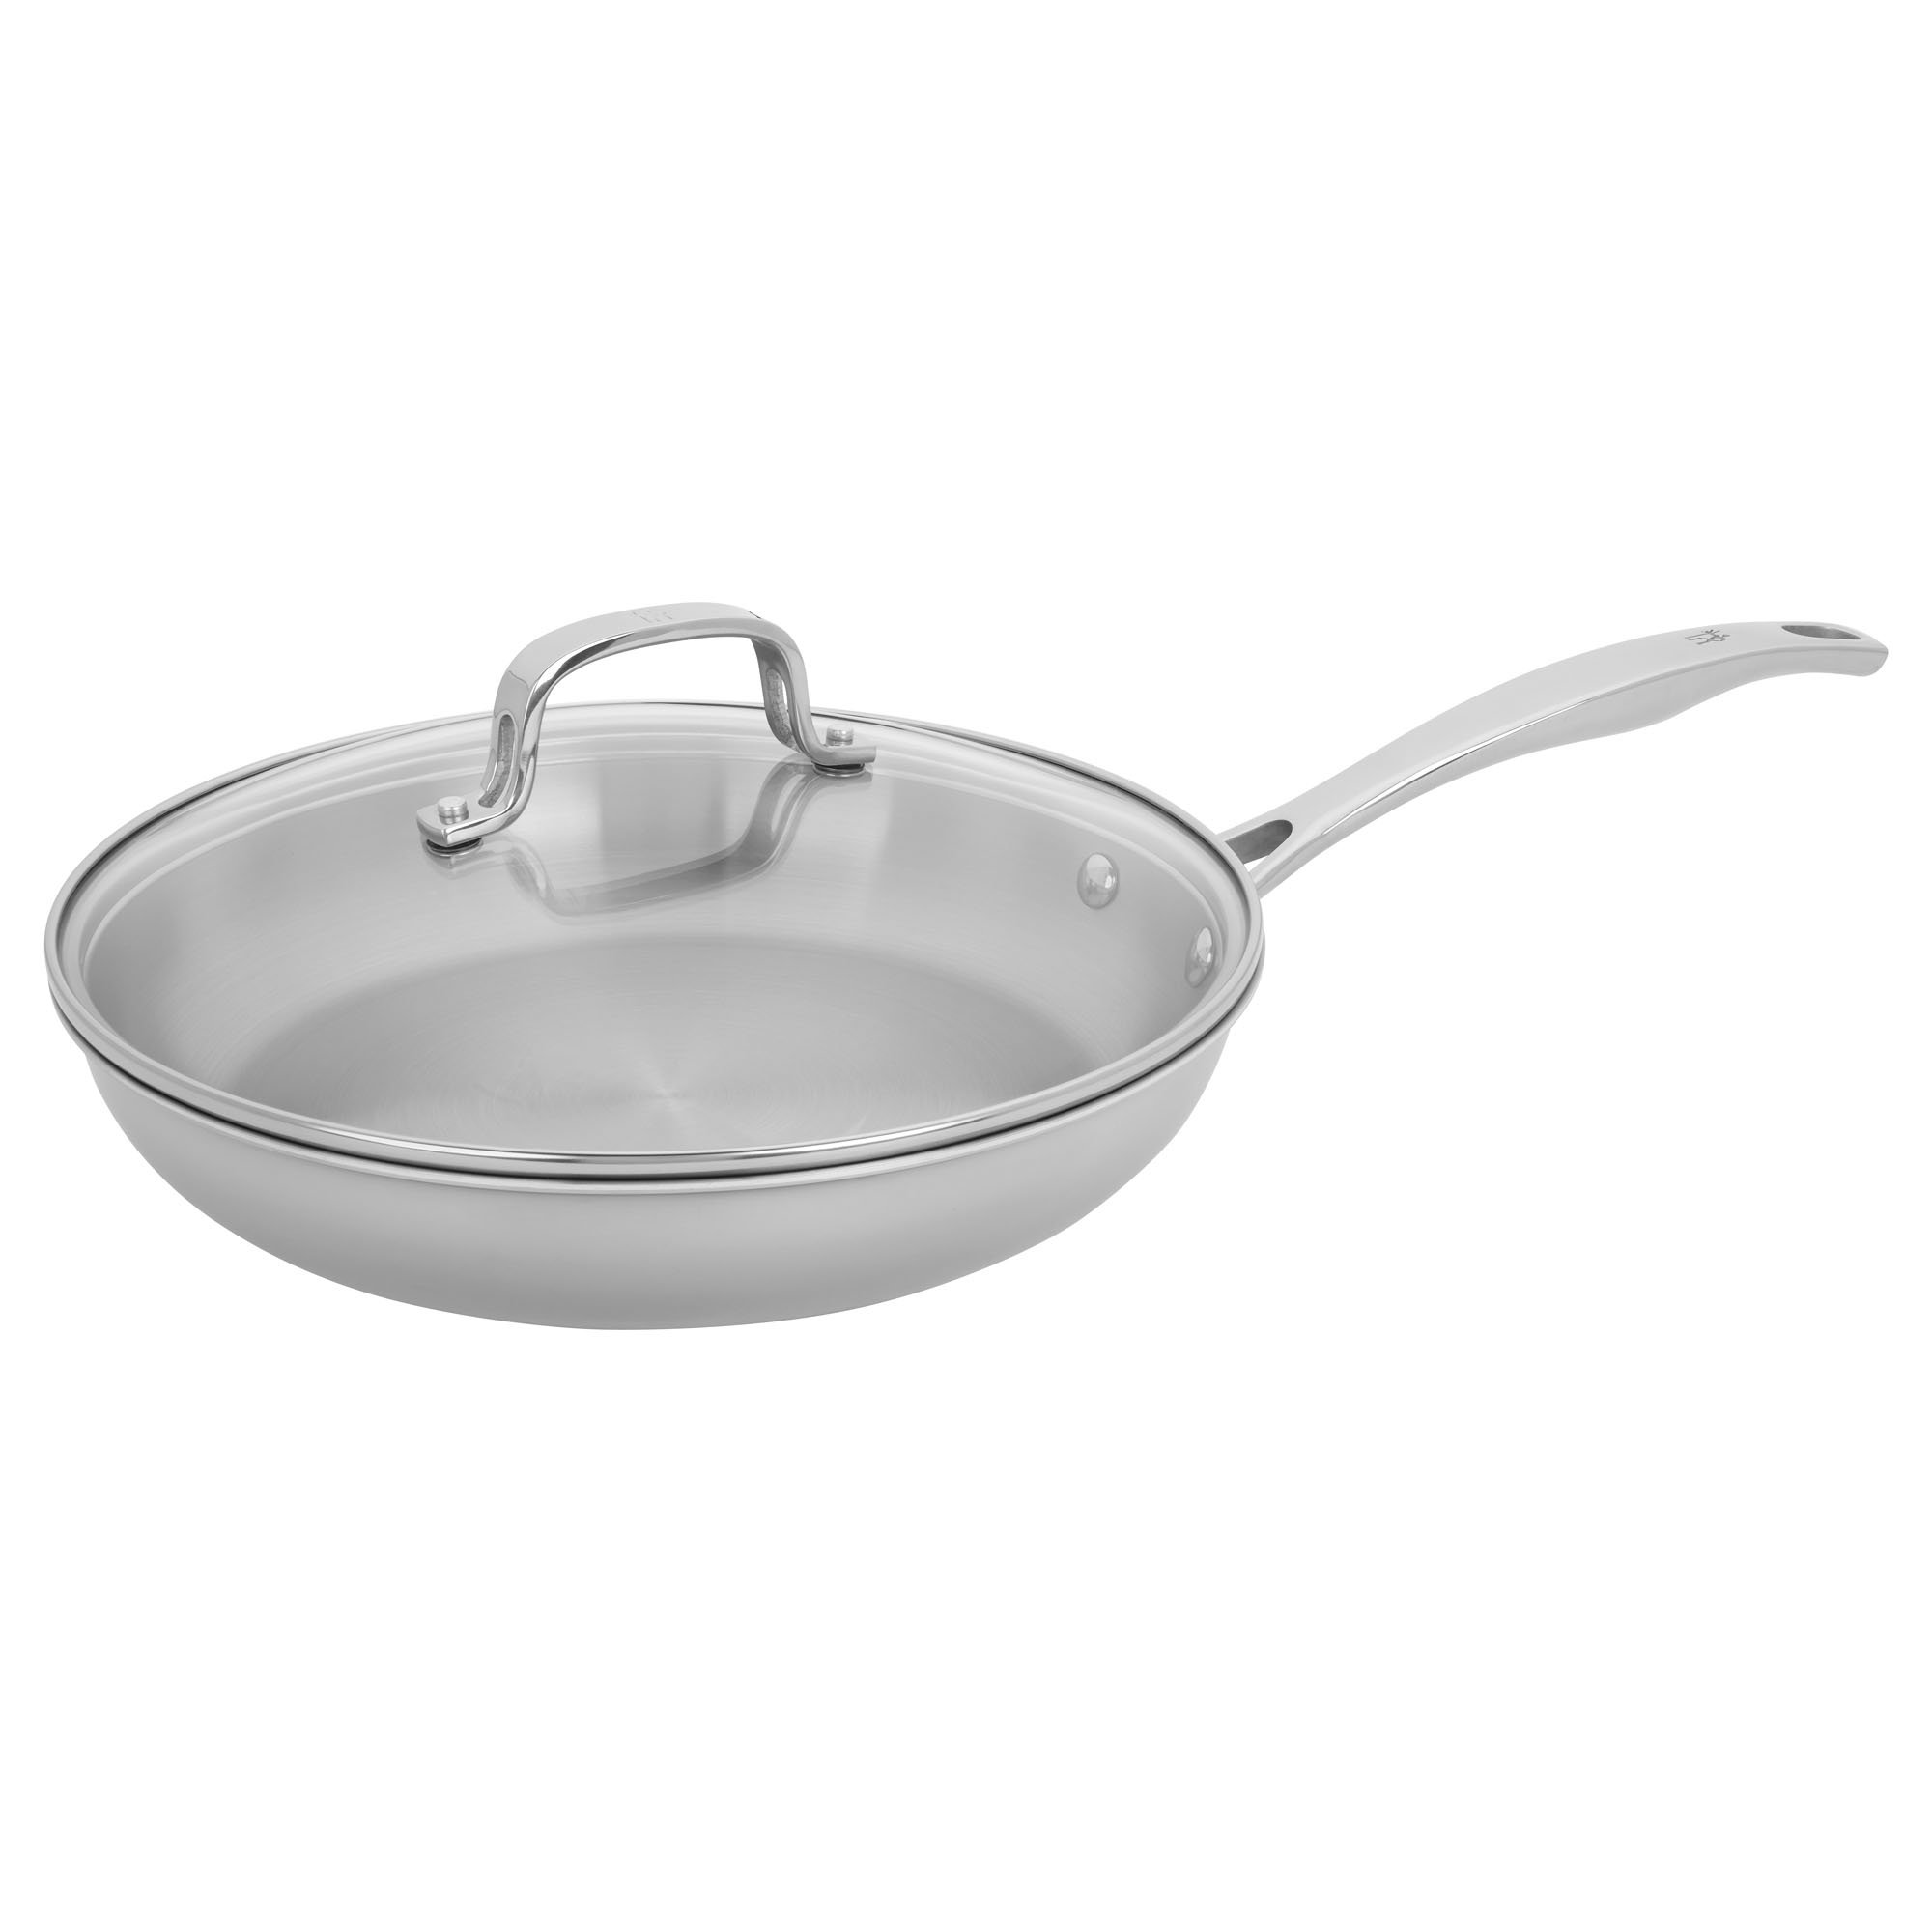 Merten & Storck Tri-Ply Stainless Steel Induction 10 and 12